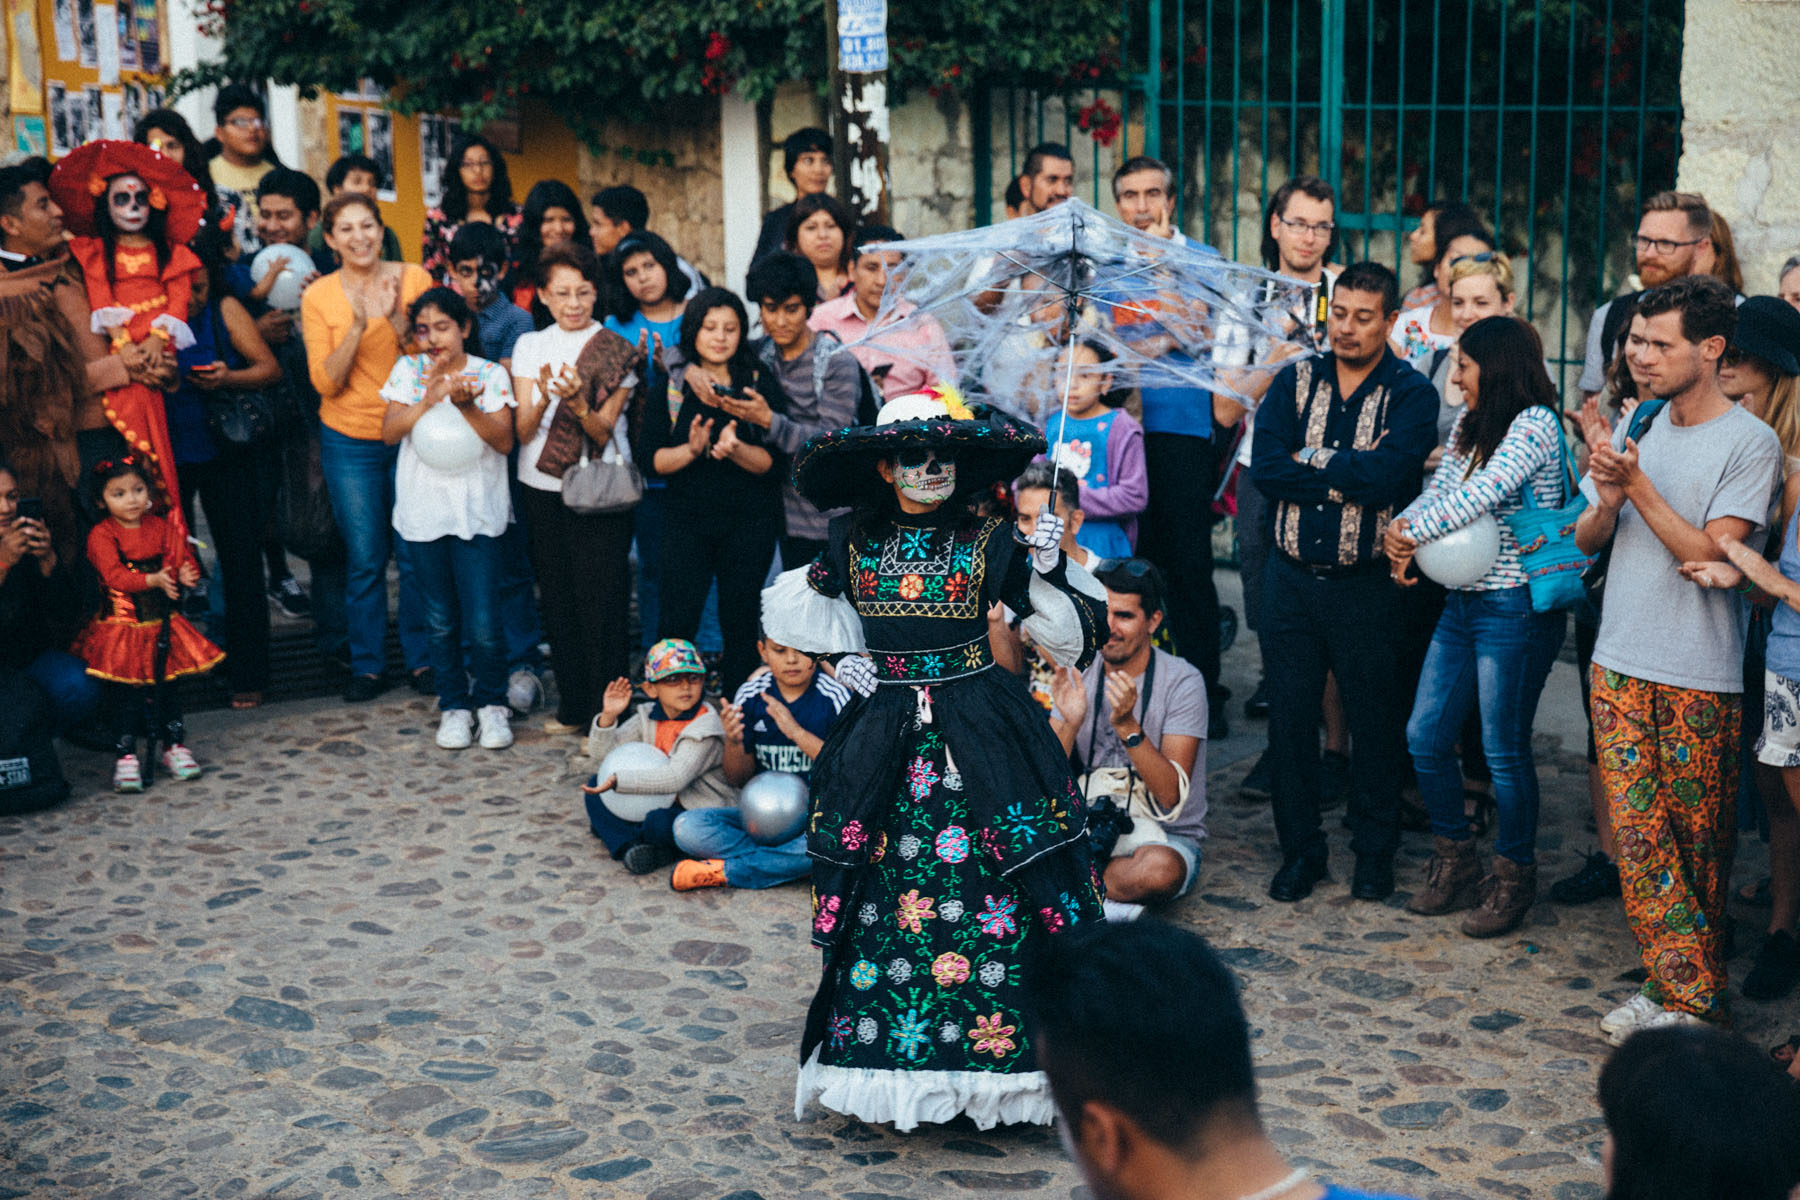 Fun Things to Experience in Mexico for Day of the Dead - Oaxaca // Notjessfashion.com